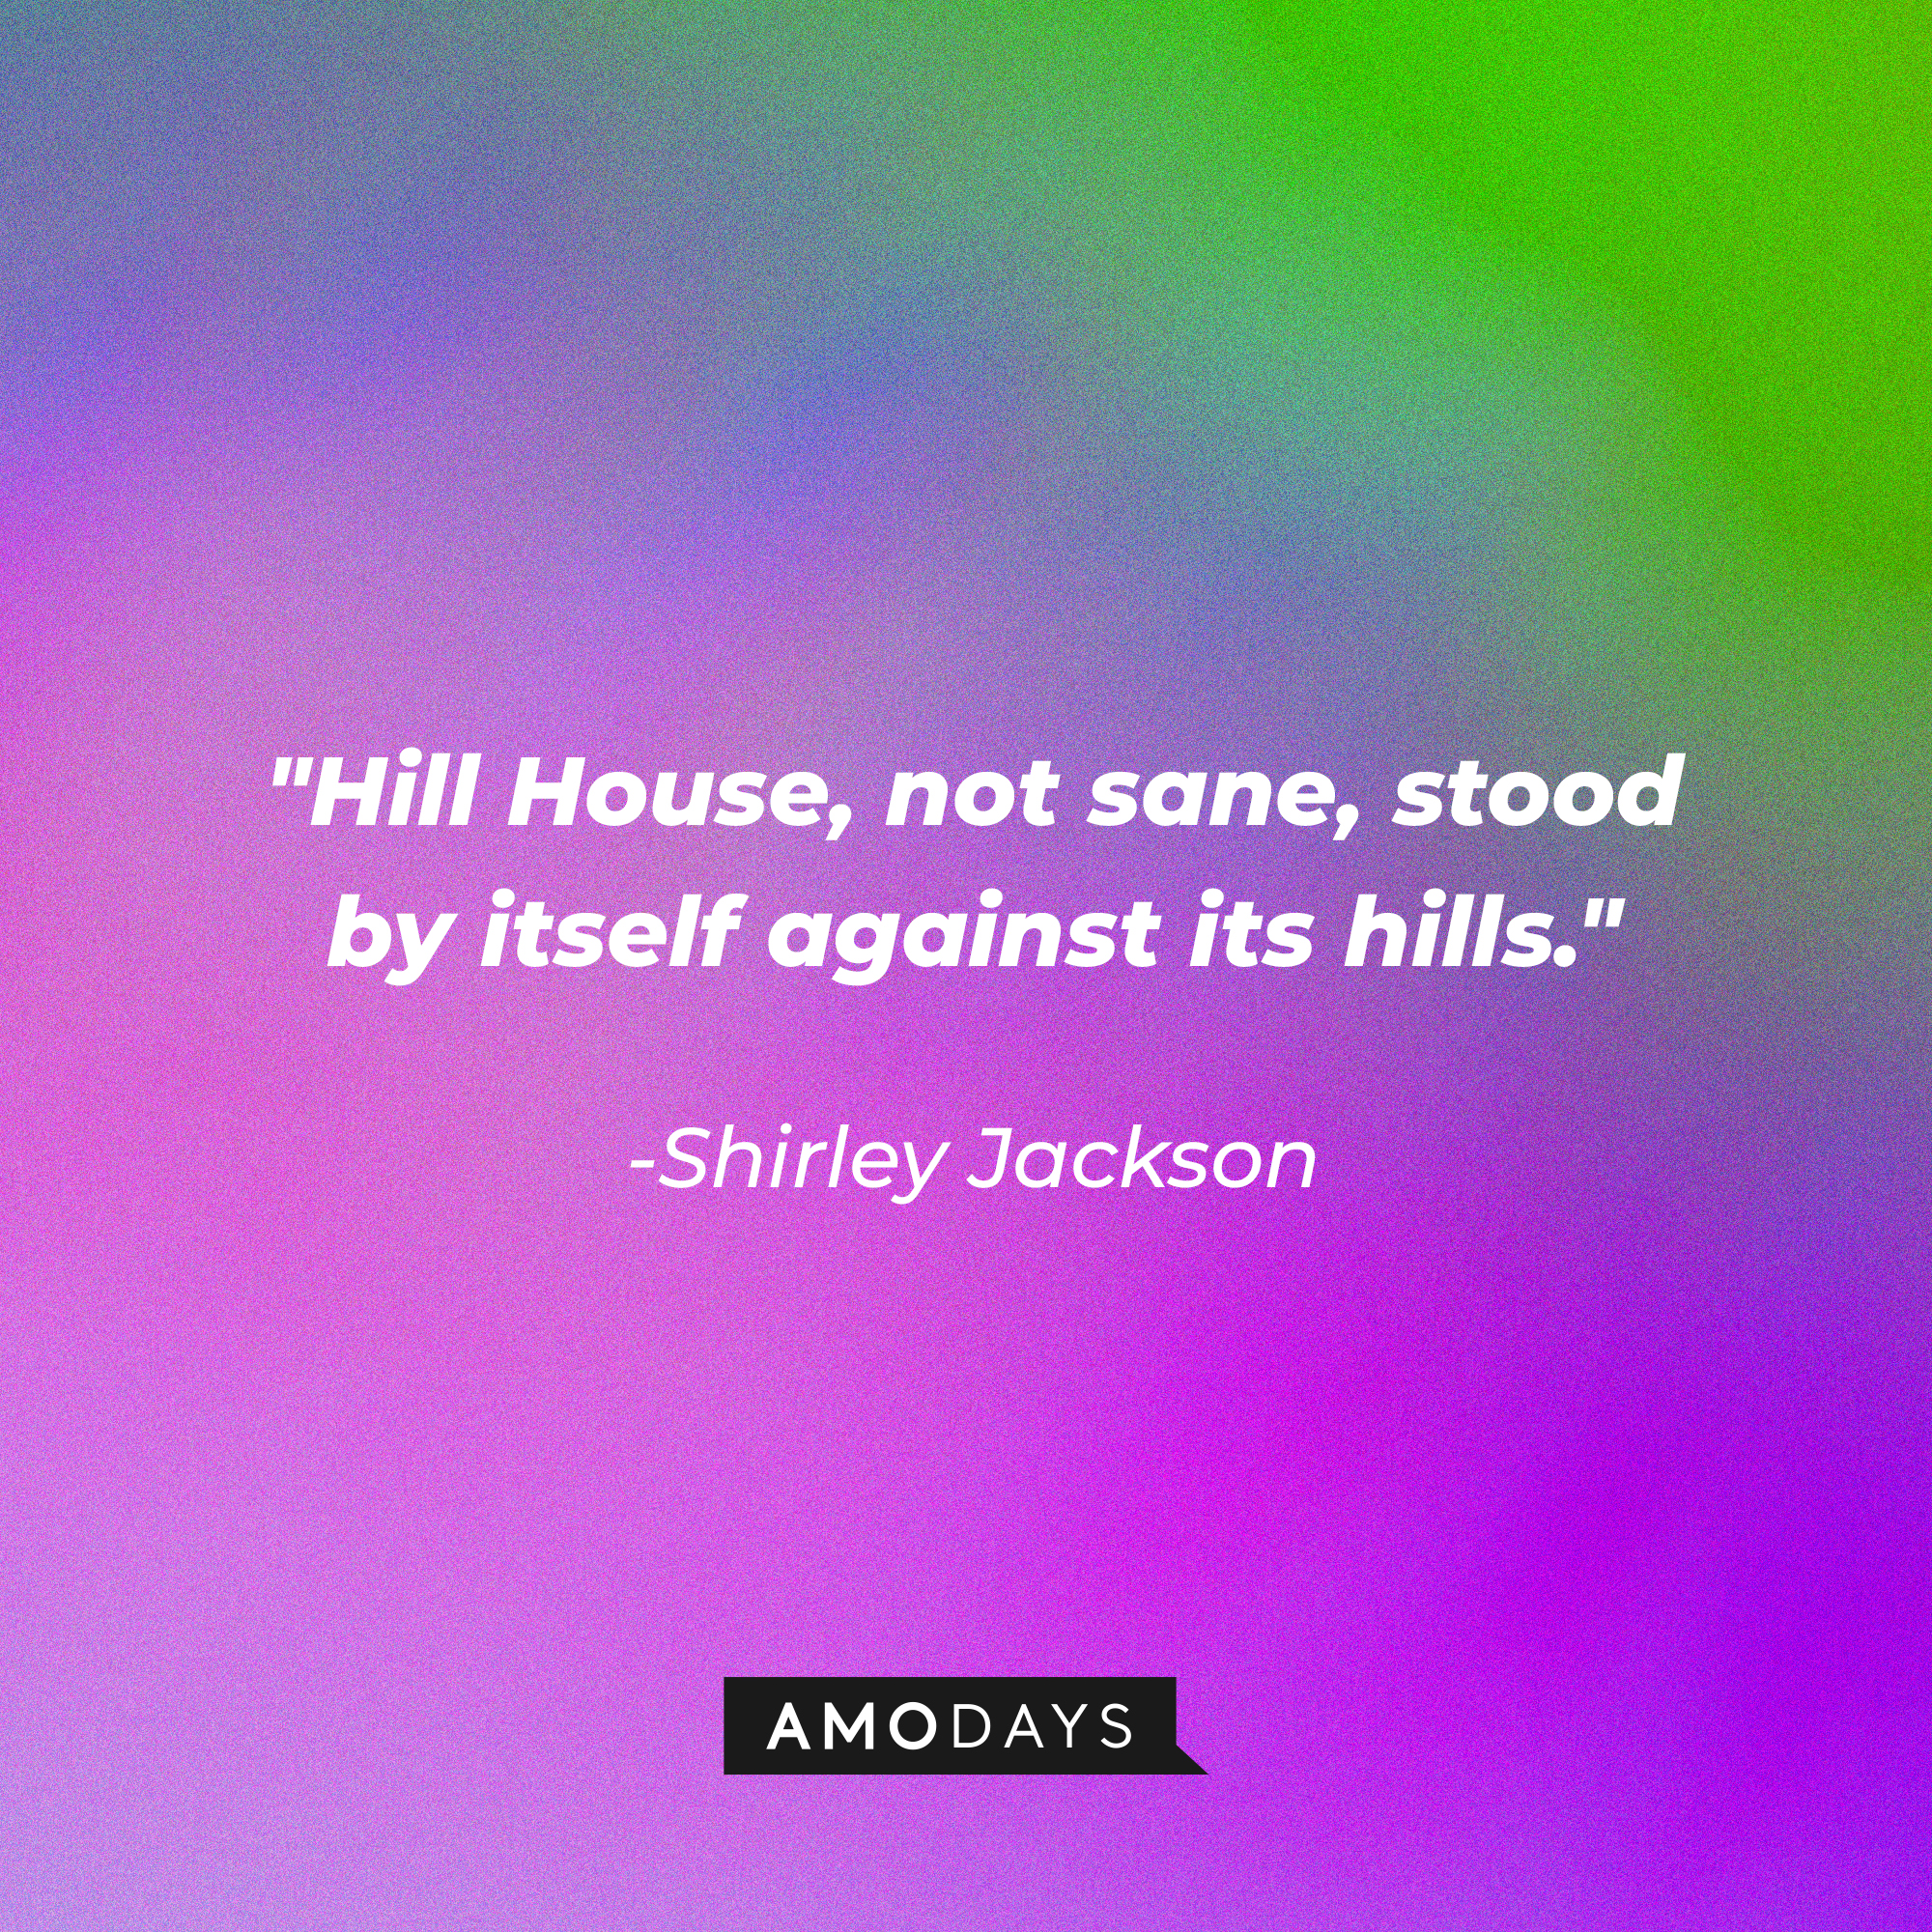 Shirley Jackson's quote: "Hill House, not sane, stood by itself against its hills." | Image: AmoDays